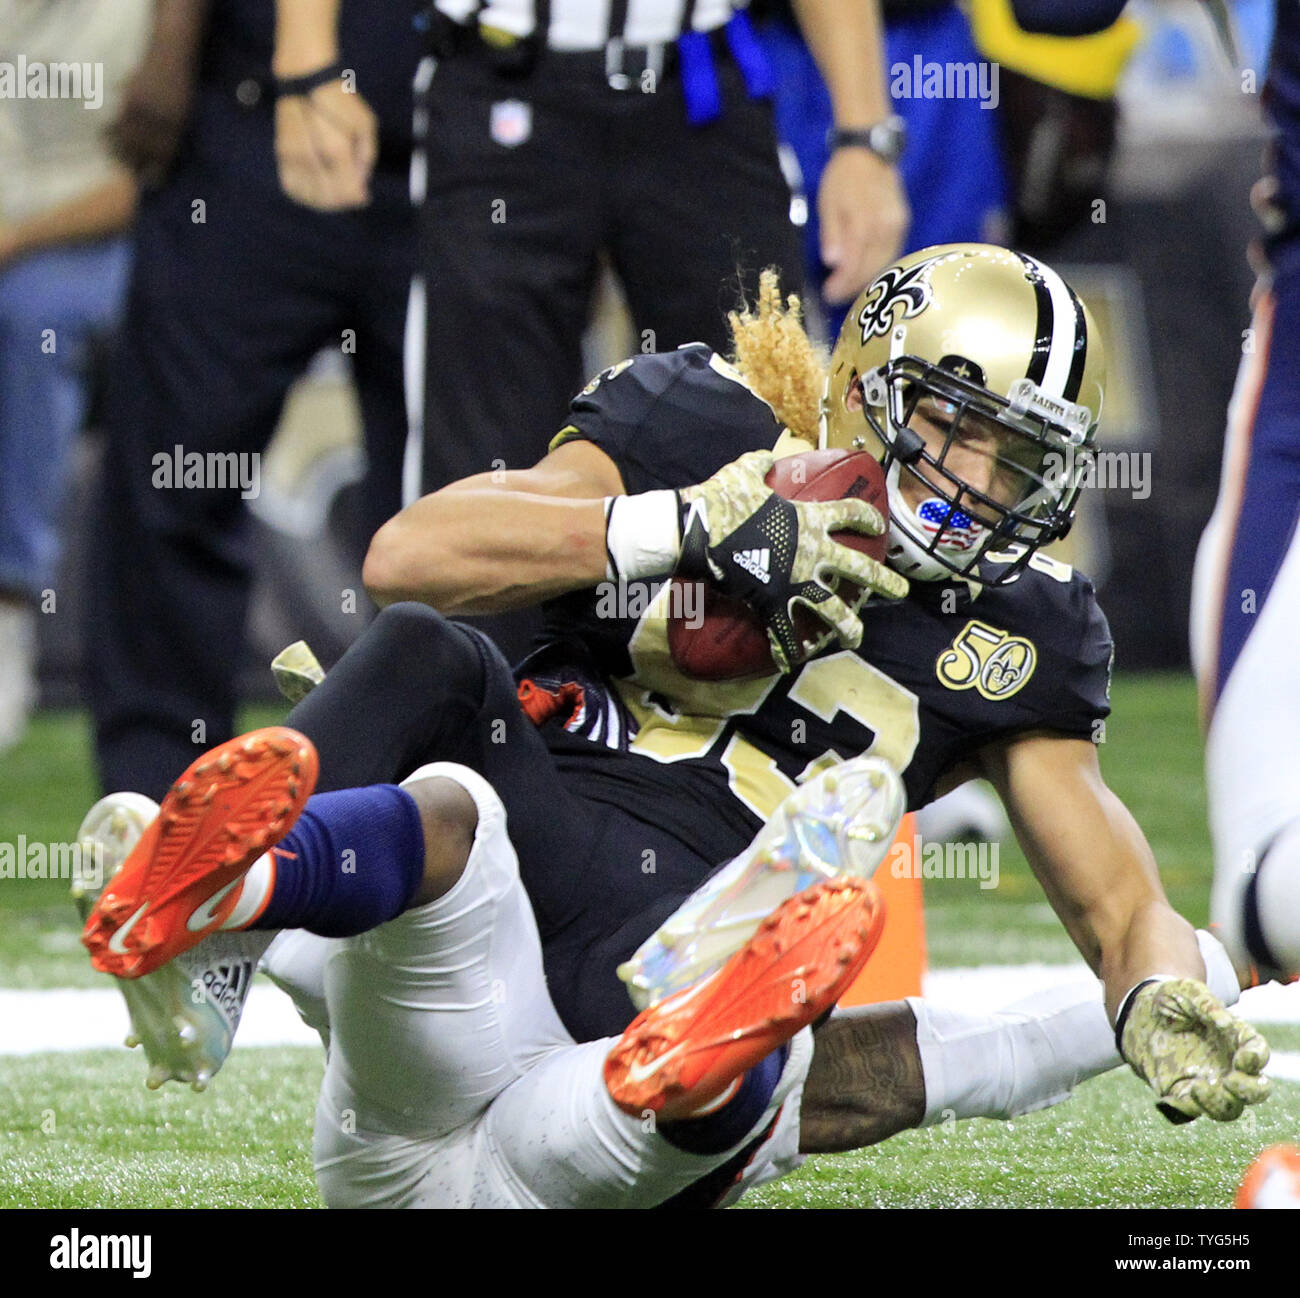 New Orleans Saints wide receiver Willie Snead (83) pulls in a 5 yard Drew Brees pass for a touchdown in front of Denver Broncos cornerback Bradley Roby (29) in the third quarter at the Mercedes-Benz Superdome in New Orleans November 13, 2016. Photo by AJ Sisco/UPI Stock Photo